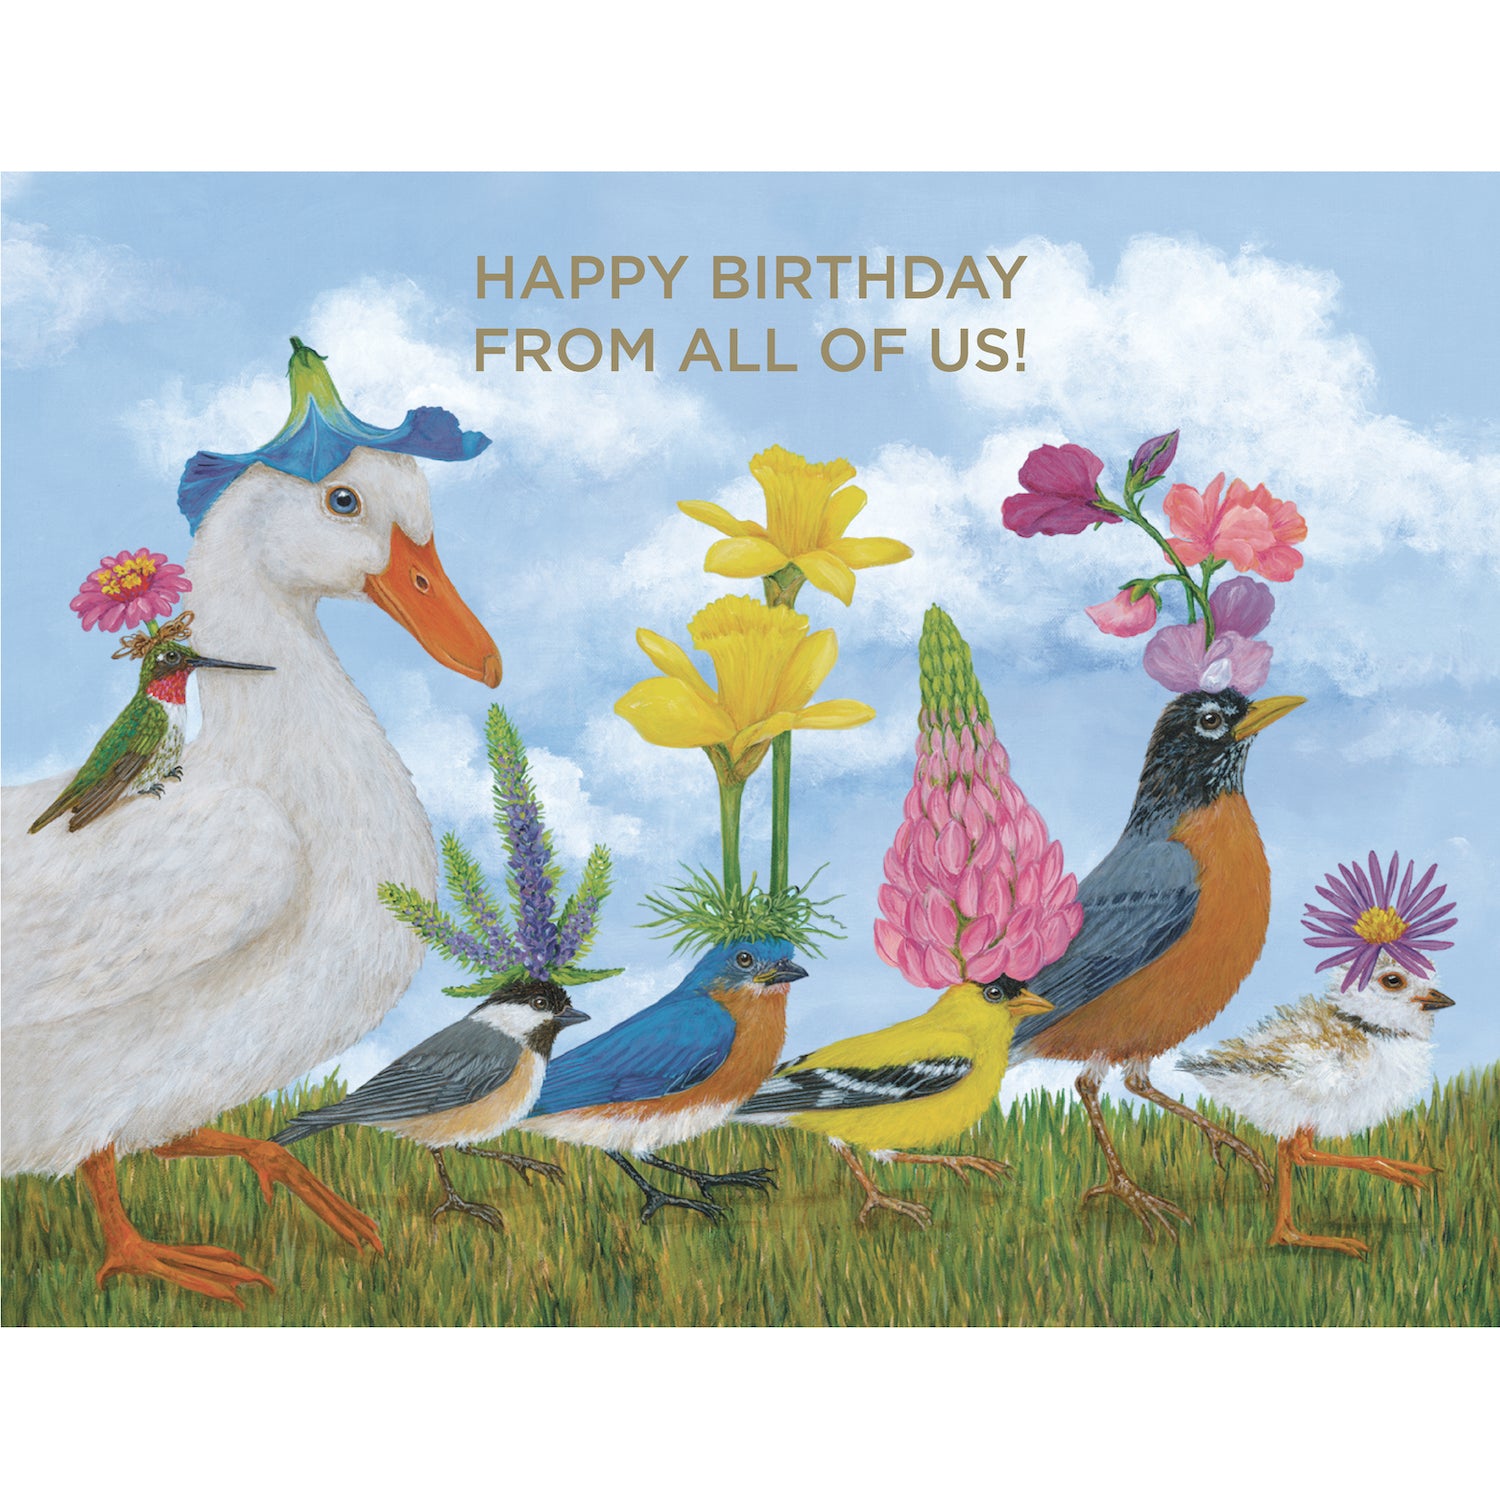 Happy birthday from all of us Hester &amp; Cook artist greeting card with natural world paintings.